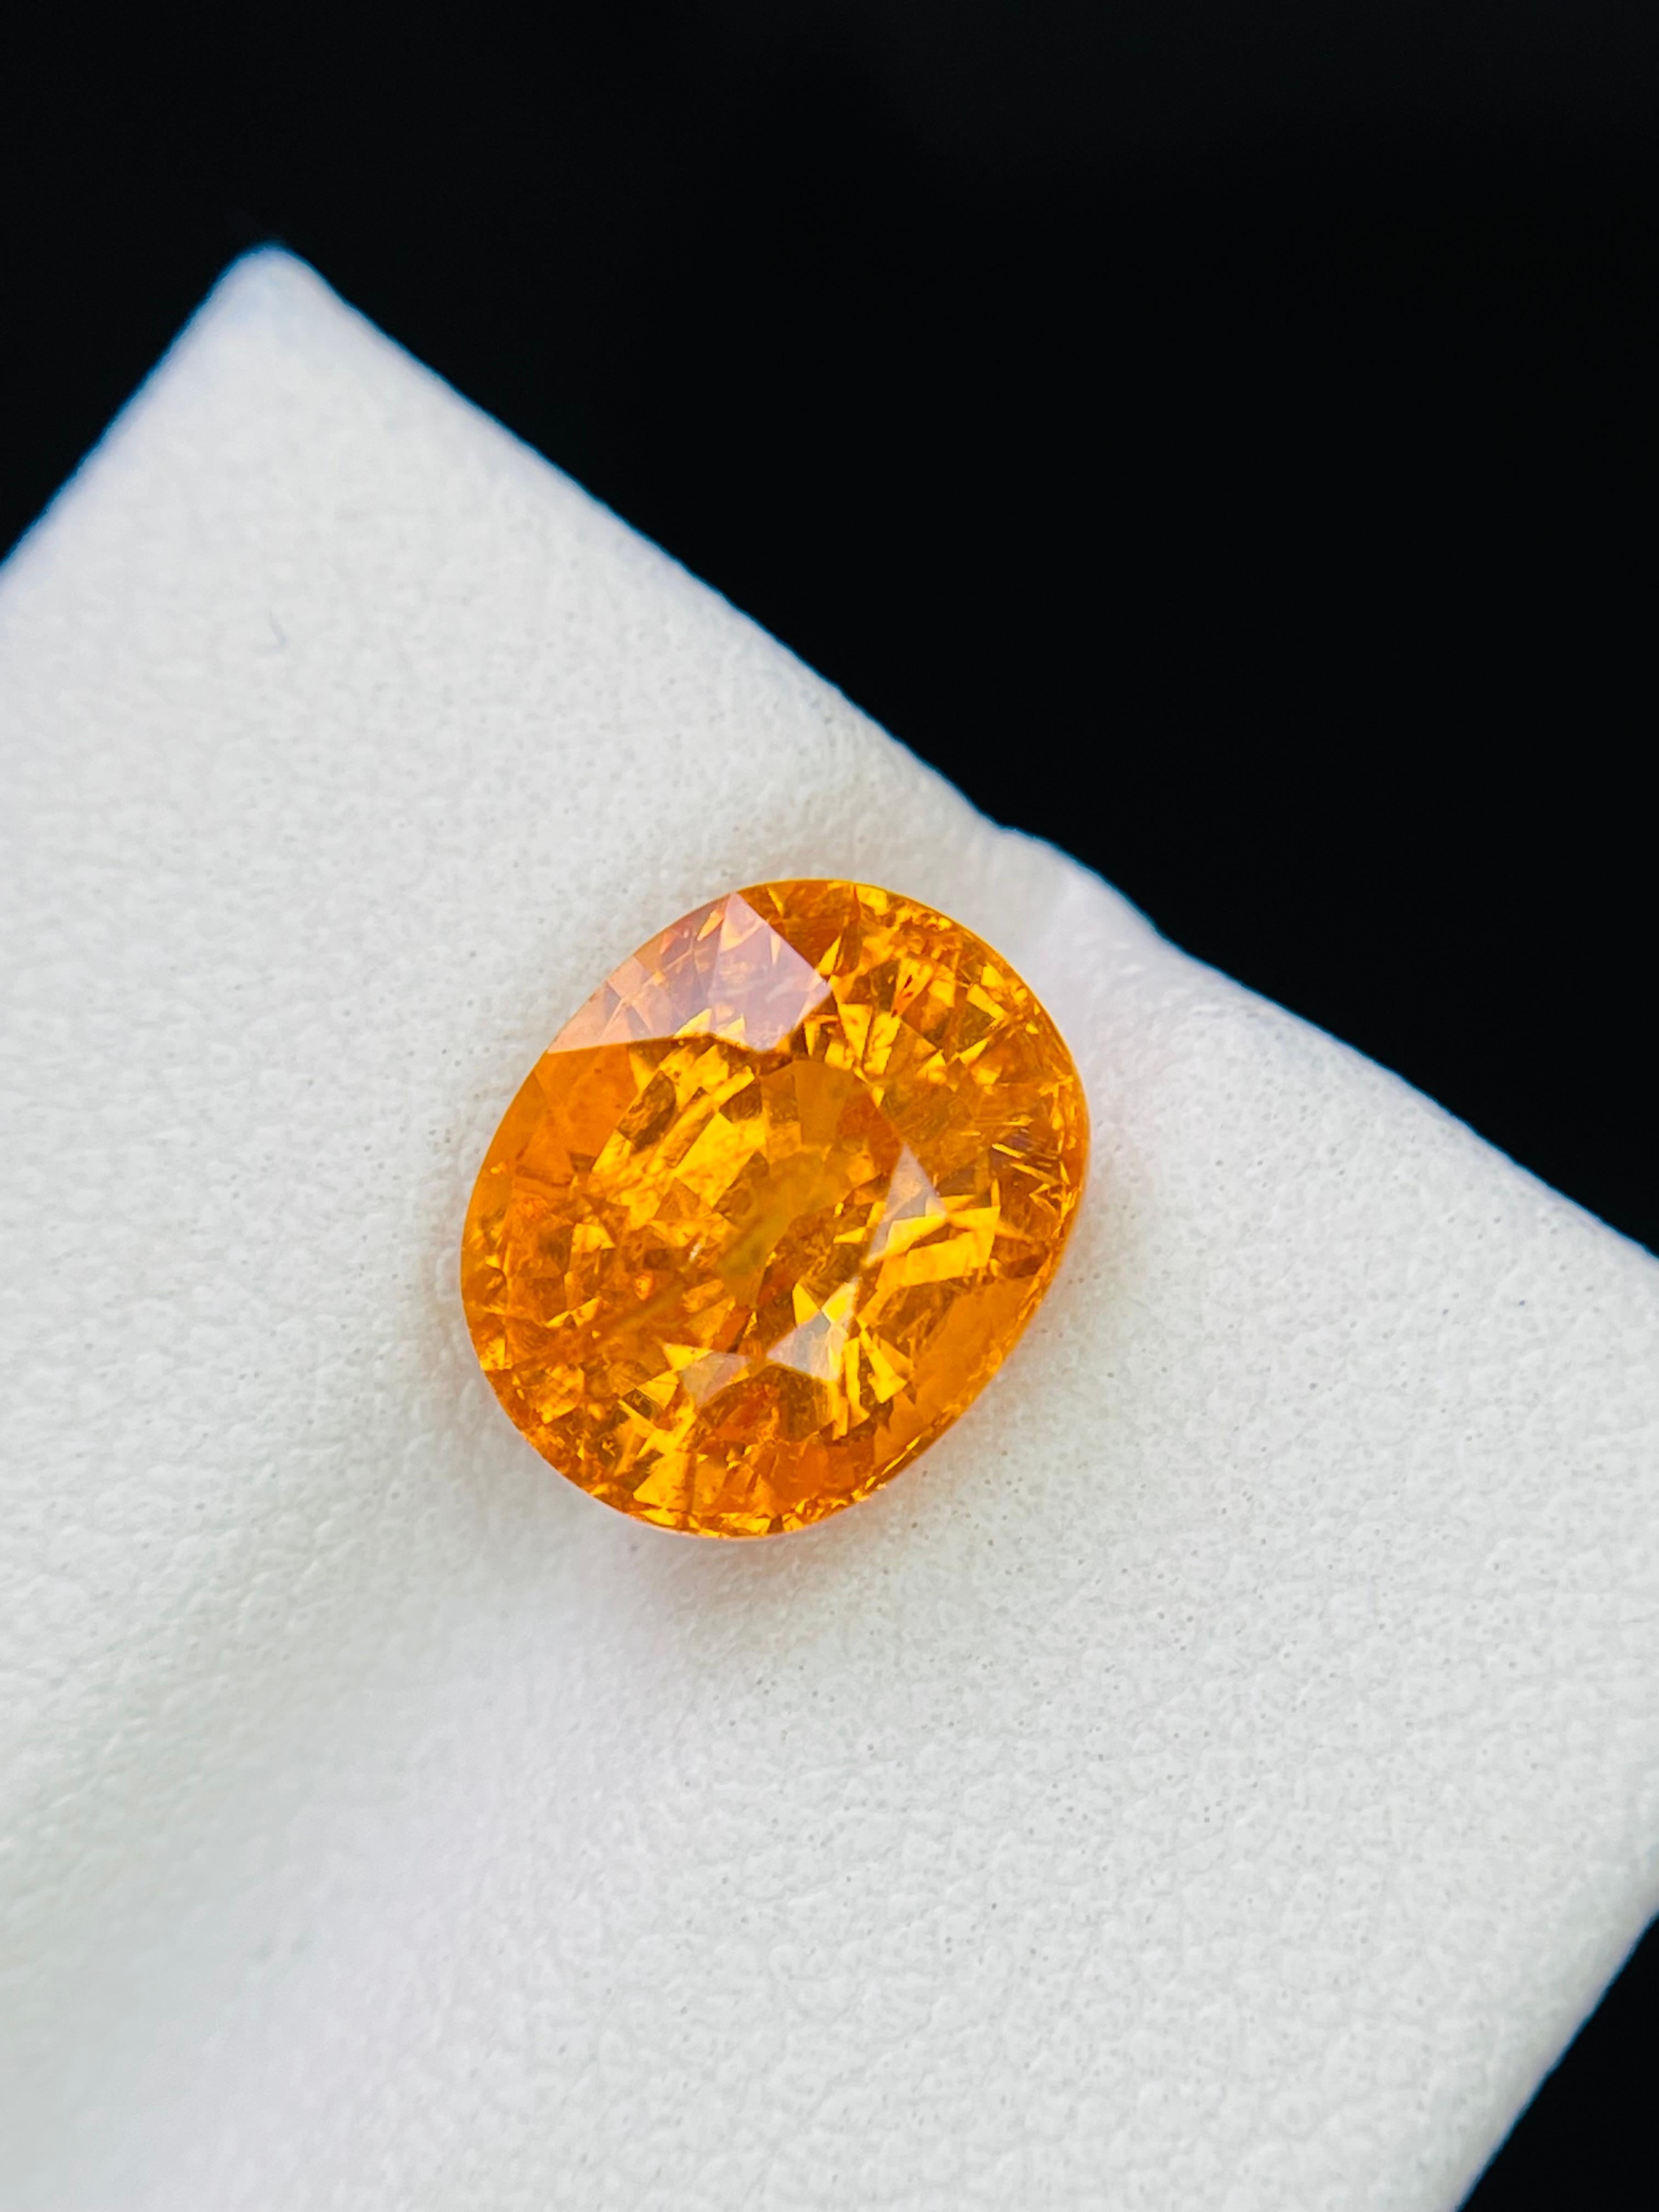 Radiant beauty captured in a 5.15 ct Fanta color spessartite garnet, its fiery hues igniting the soul. The gem’s mesmerizing brilliance dances with every flicker of light, a testament to nature’s artistry.
—————————————————————-
Stone💎: Spessartite